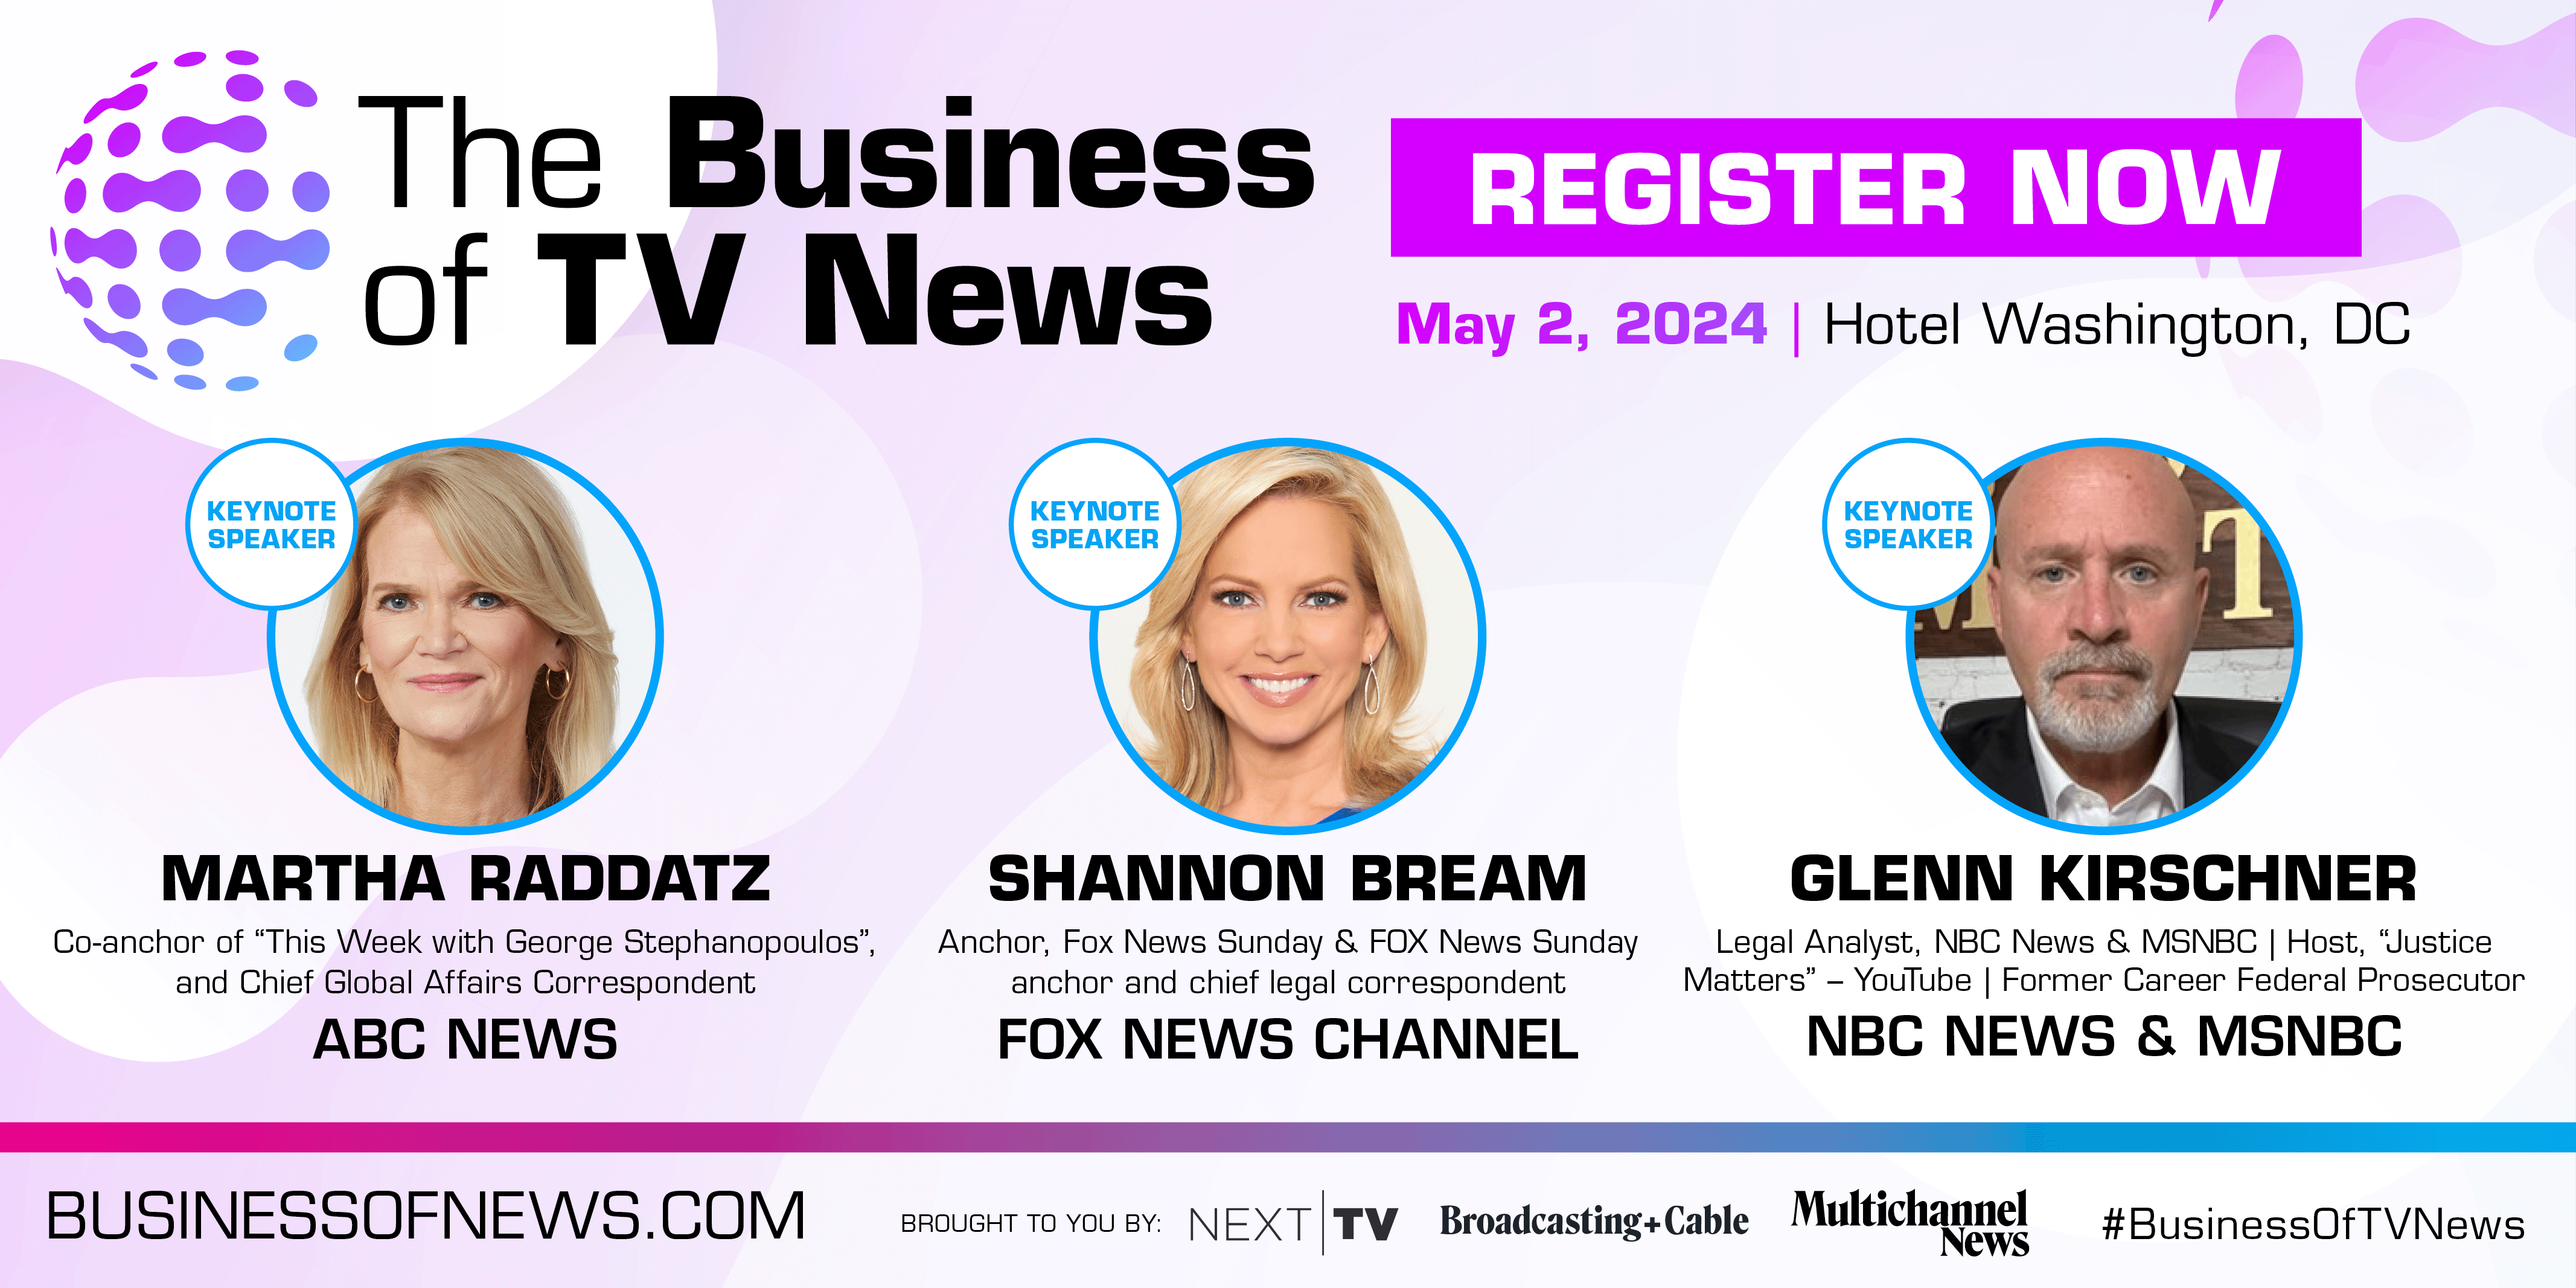 Business of TV News top keynotes